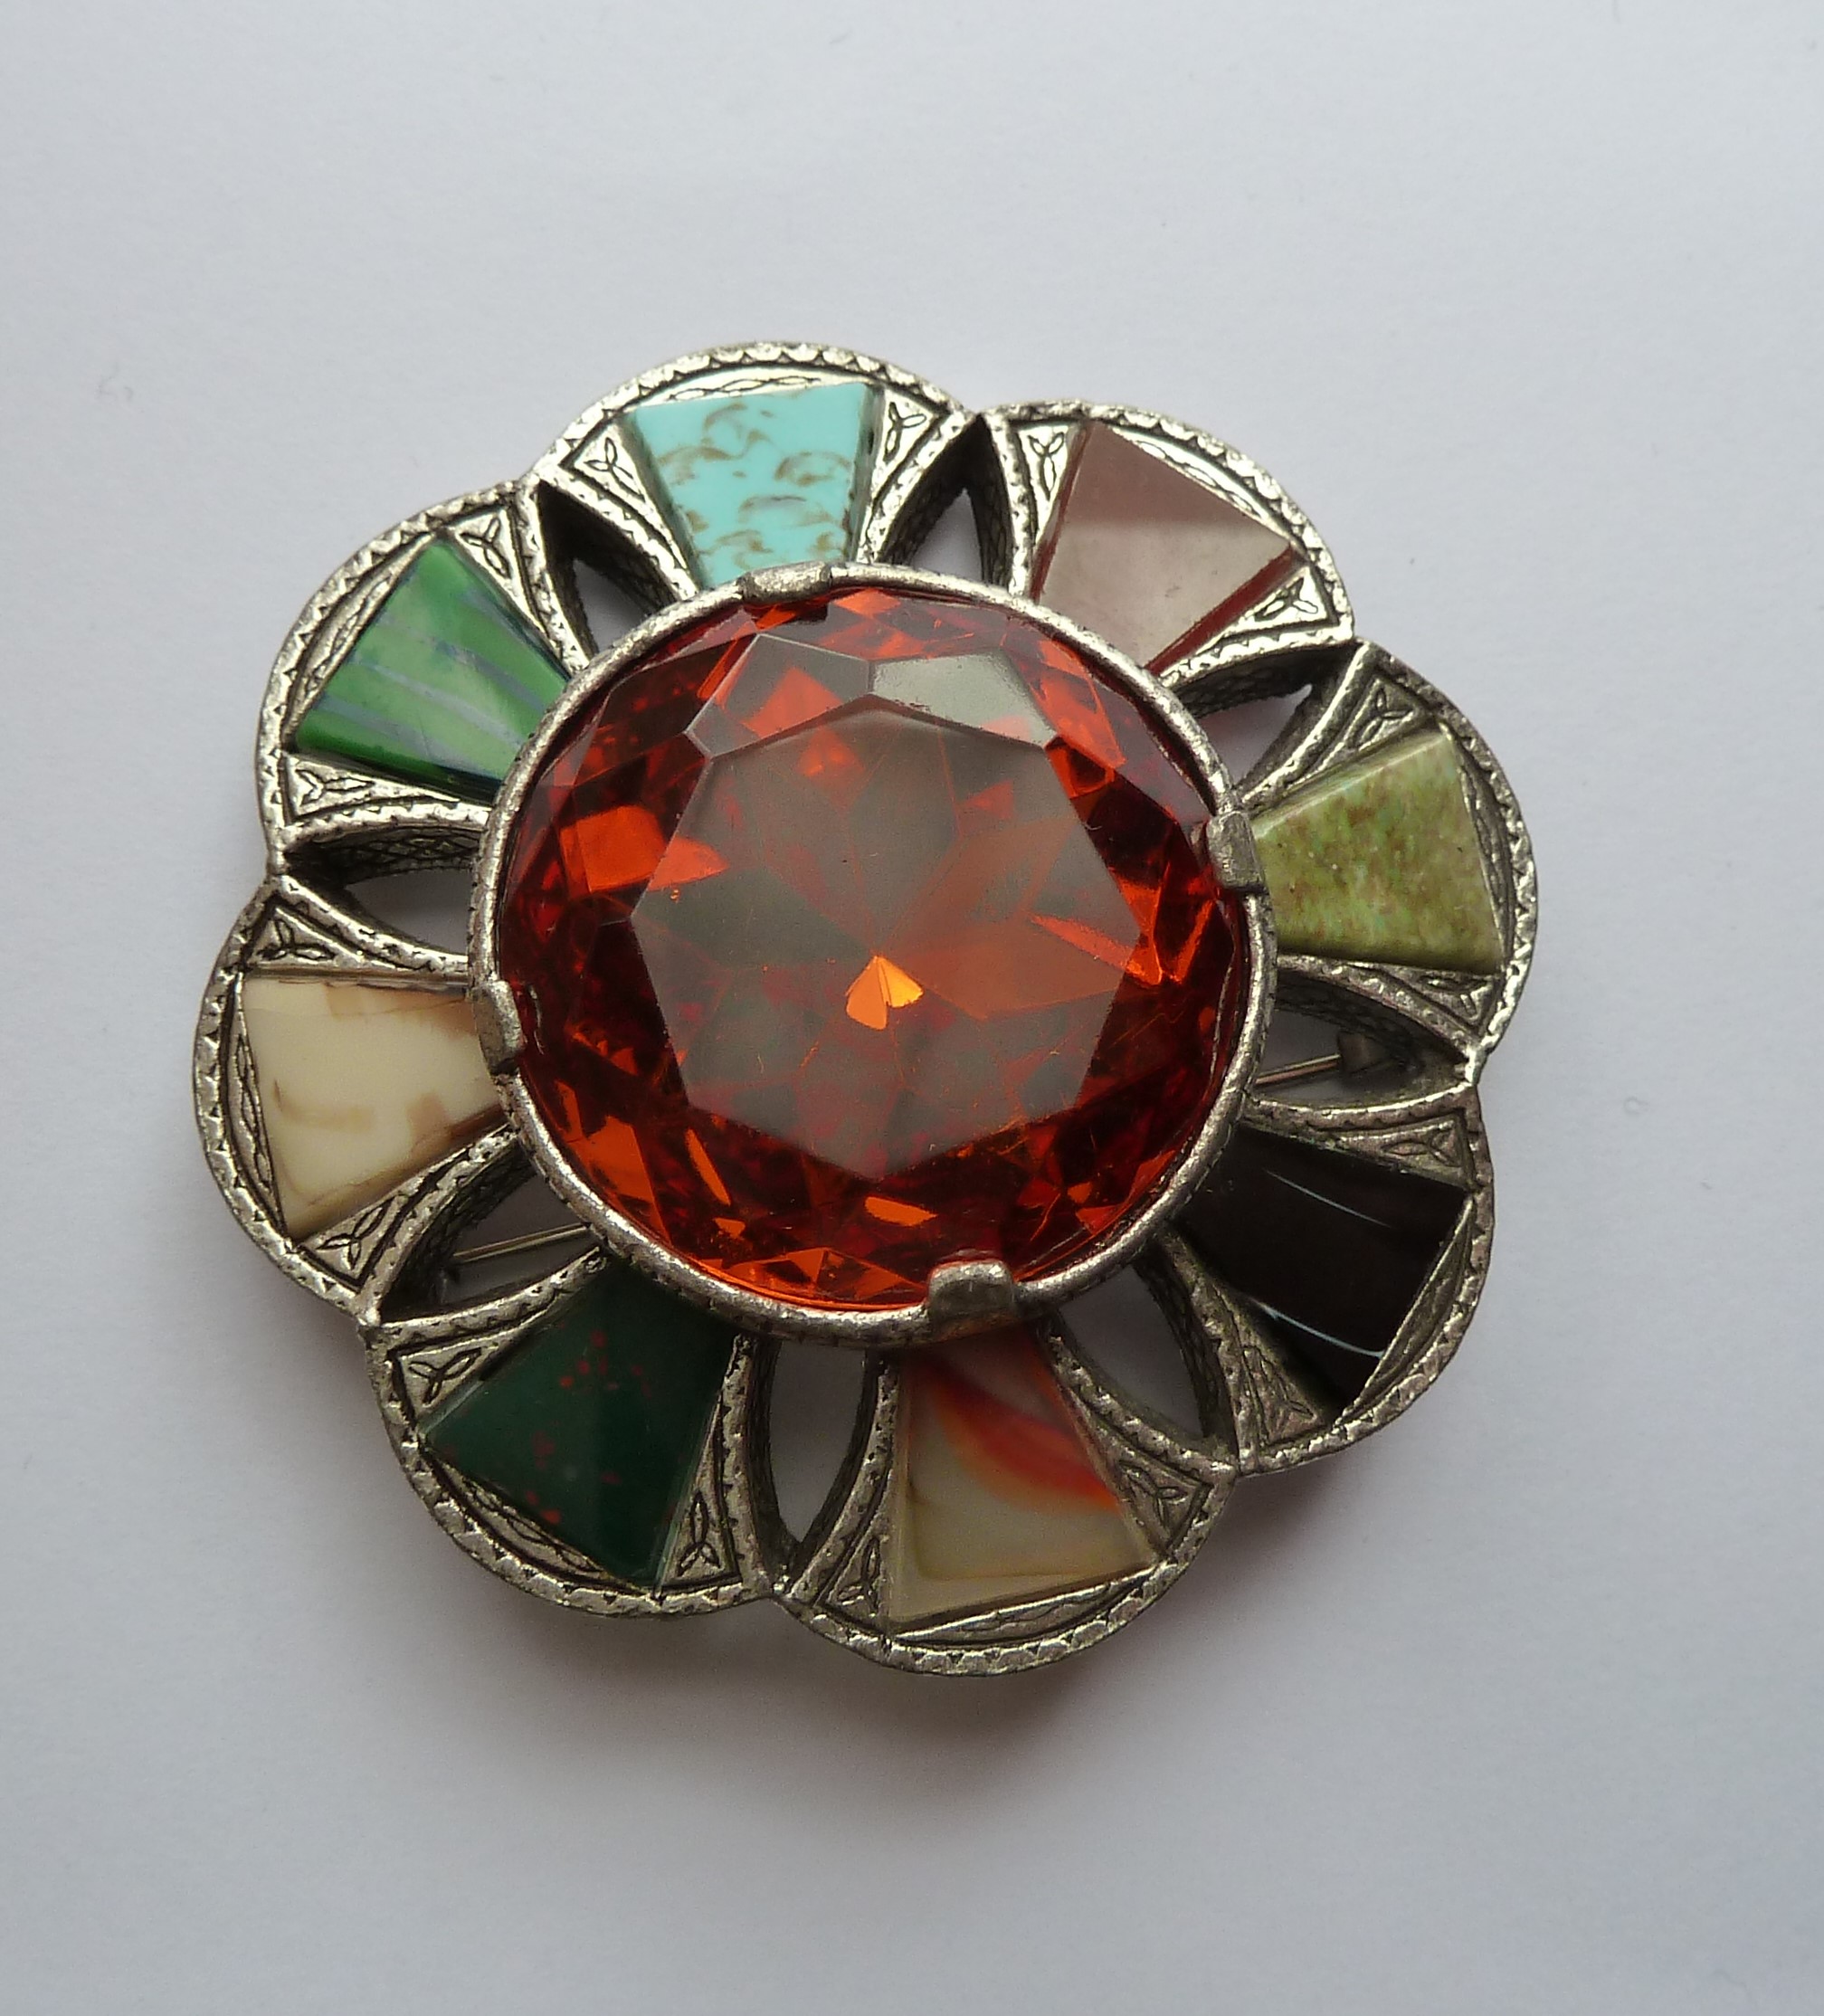 Miracle large vintage faux agates brooch